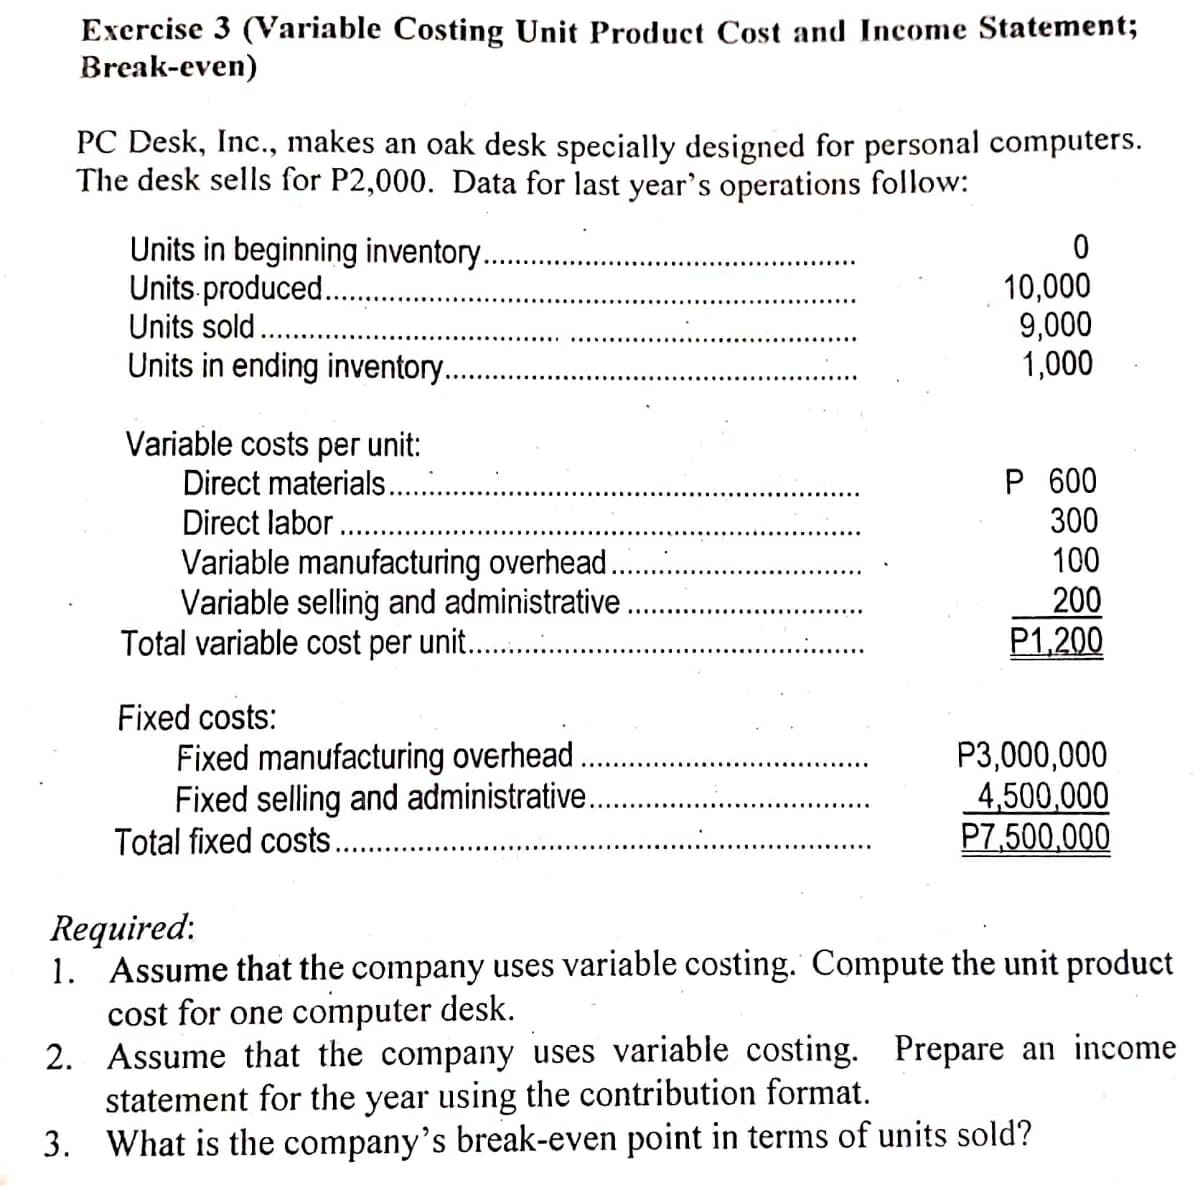 Exercise 3 (Variable Costing Unit Product Cost and Income Statement;
Break-even)
PC Desk, Inc., makes an oak desk specially designed for personal computers.
The desk sells for P2,000. Data for last year's operations follow:
Units in beginning inventor..
Units produced..
Units sold.
Units in ending inventory.
10,000
9,000
1,000
Variable costs per unit:
Direct materials..
Direct labor
Variable manufacturing overhead.
Variable selling and administrative
Total variable cost per unit. .
P 600
300
100
200
P1,200
Fixed costs:
Fixed manufacturing overhead
Fixed selling and administrative.
Total fixed costs...
P3,000,000
4,500,000
P7,500,000
Required:
1. Assume that the company uses variable costing. Compute the unit product
cost for one computer desk.
2. Assume that the company uses variable costing. Prepare an income
statement for the year using the contribution format.
3. What is the company's break-even point in terms of units sold?
